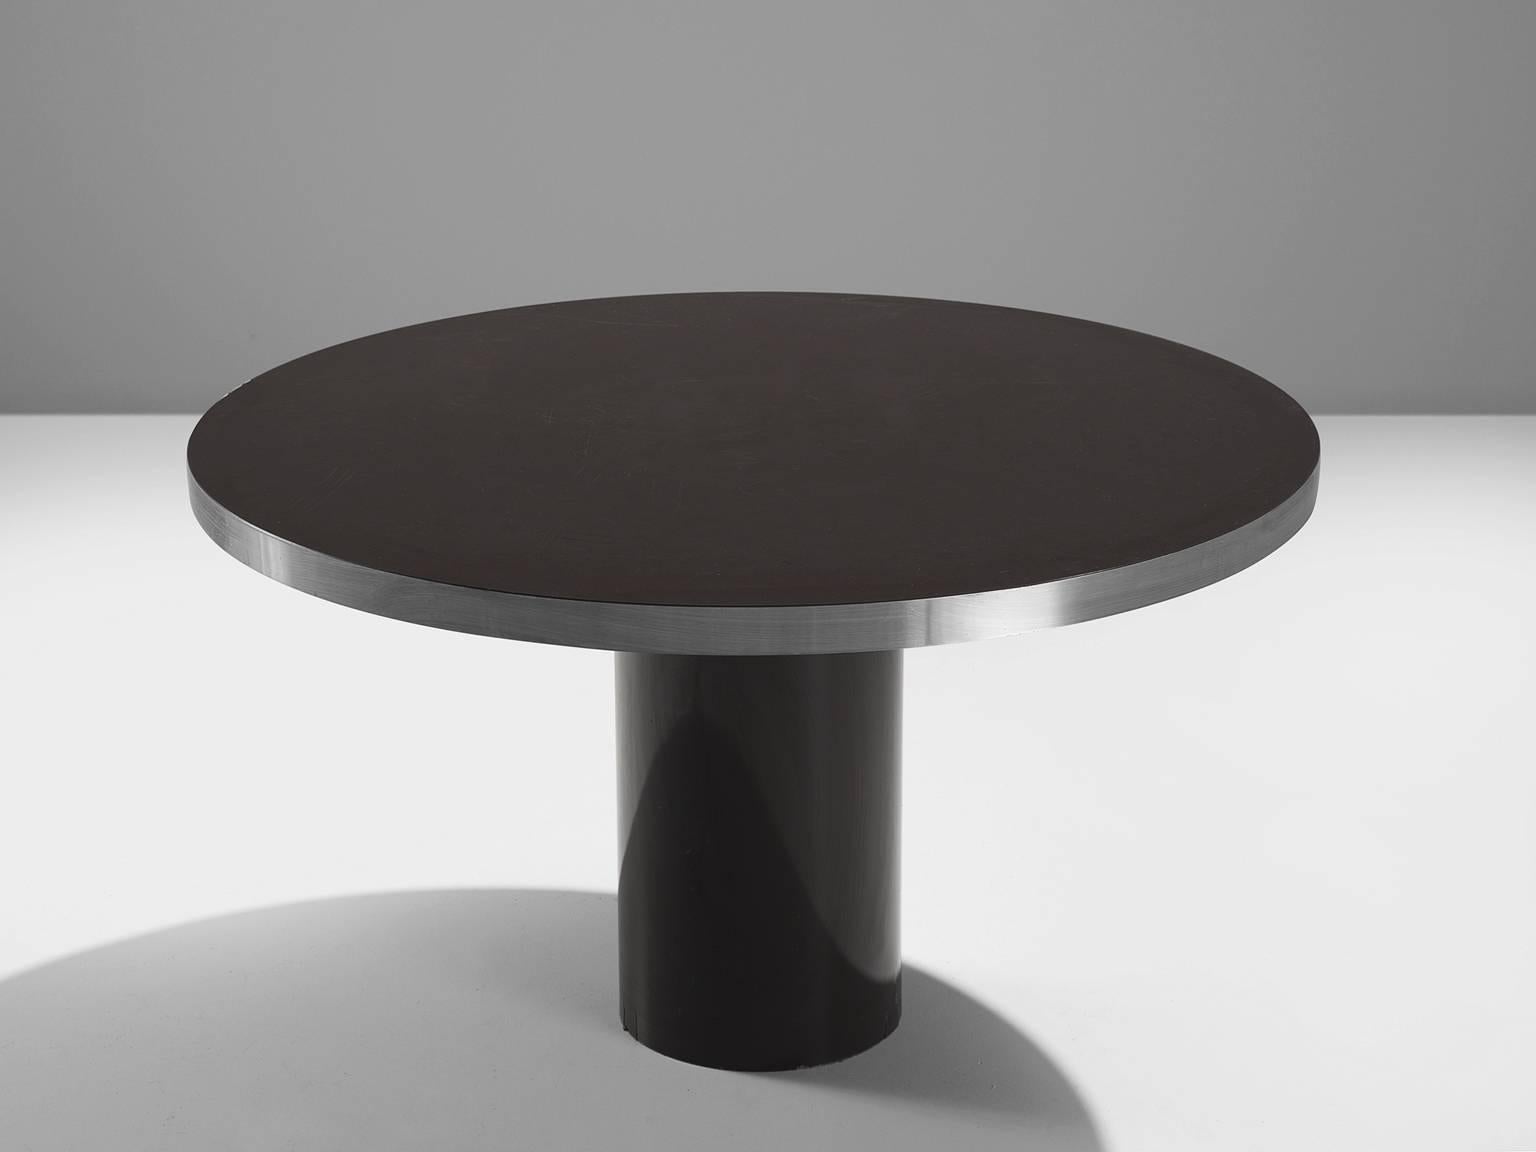 Dining table, high pressured laminate with coating and steel, 1980s, Europe.

This dining is both clean and modest. The design features a single pedestal foot and a circular top finished with mat steel. The table is modest and simplistic. This